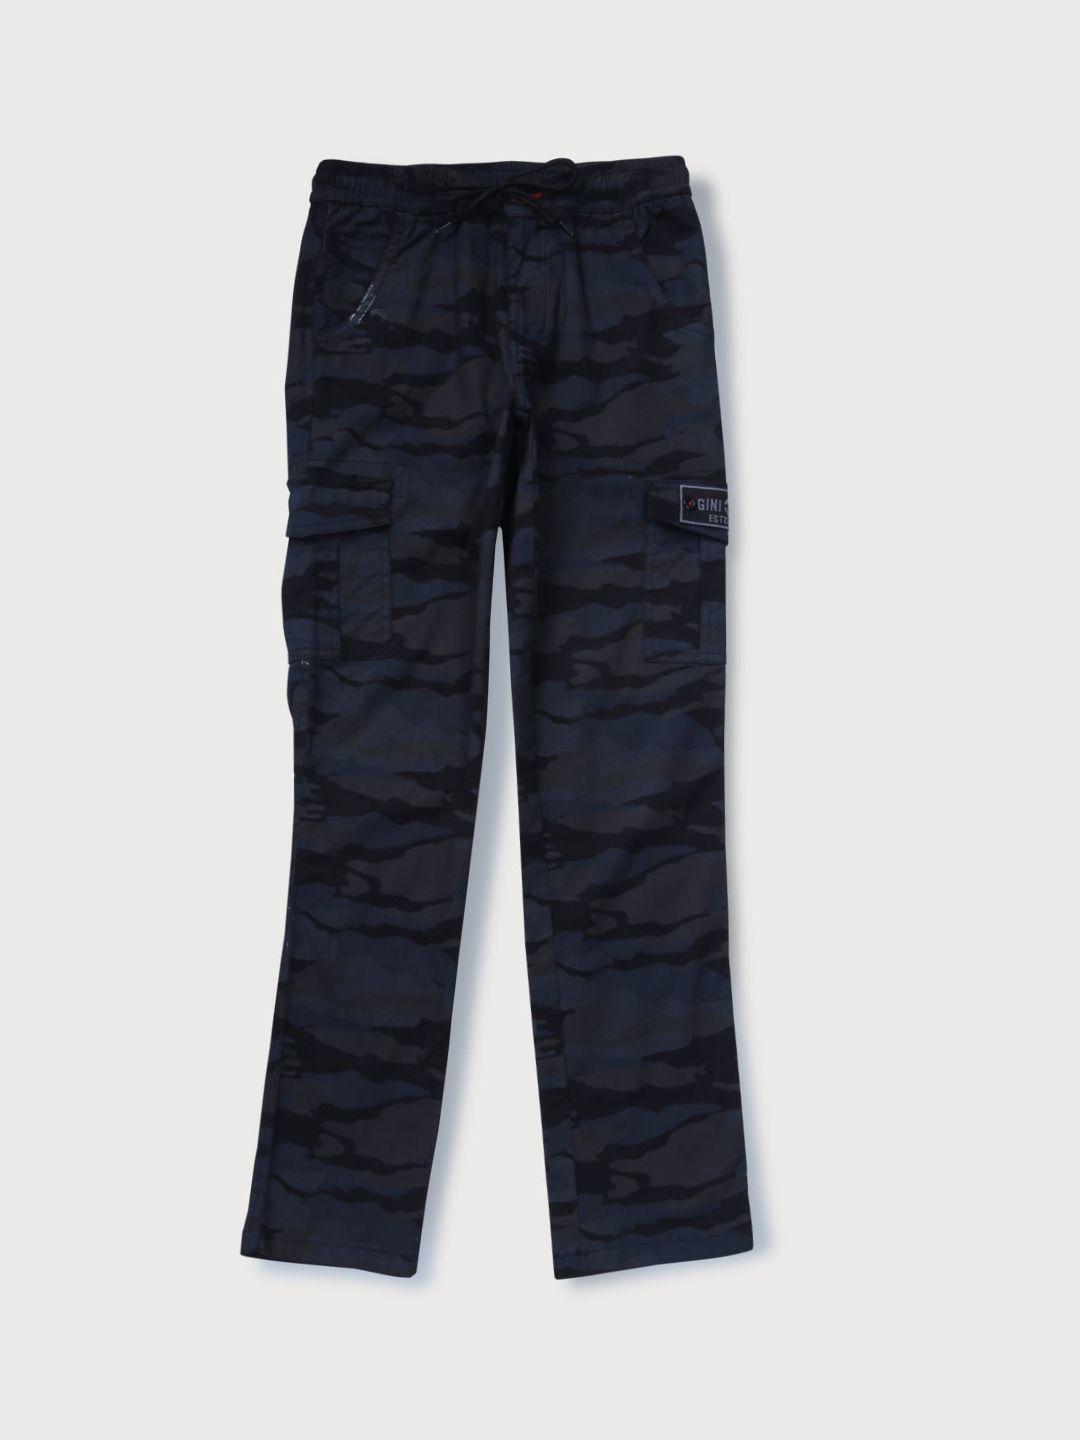 gini-and-jony-boys-cotton-camouflage-printed-cargos-trousers